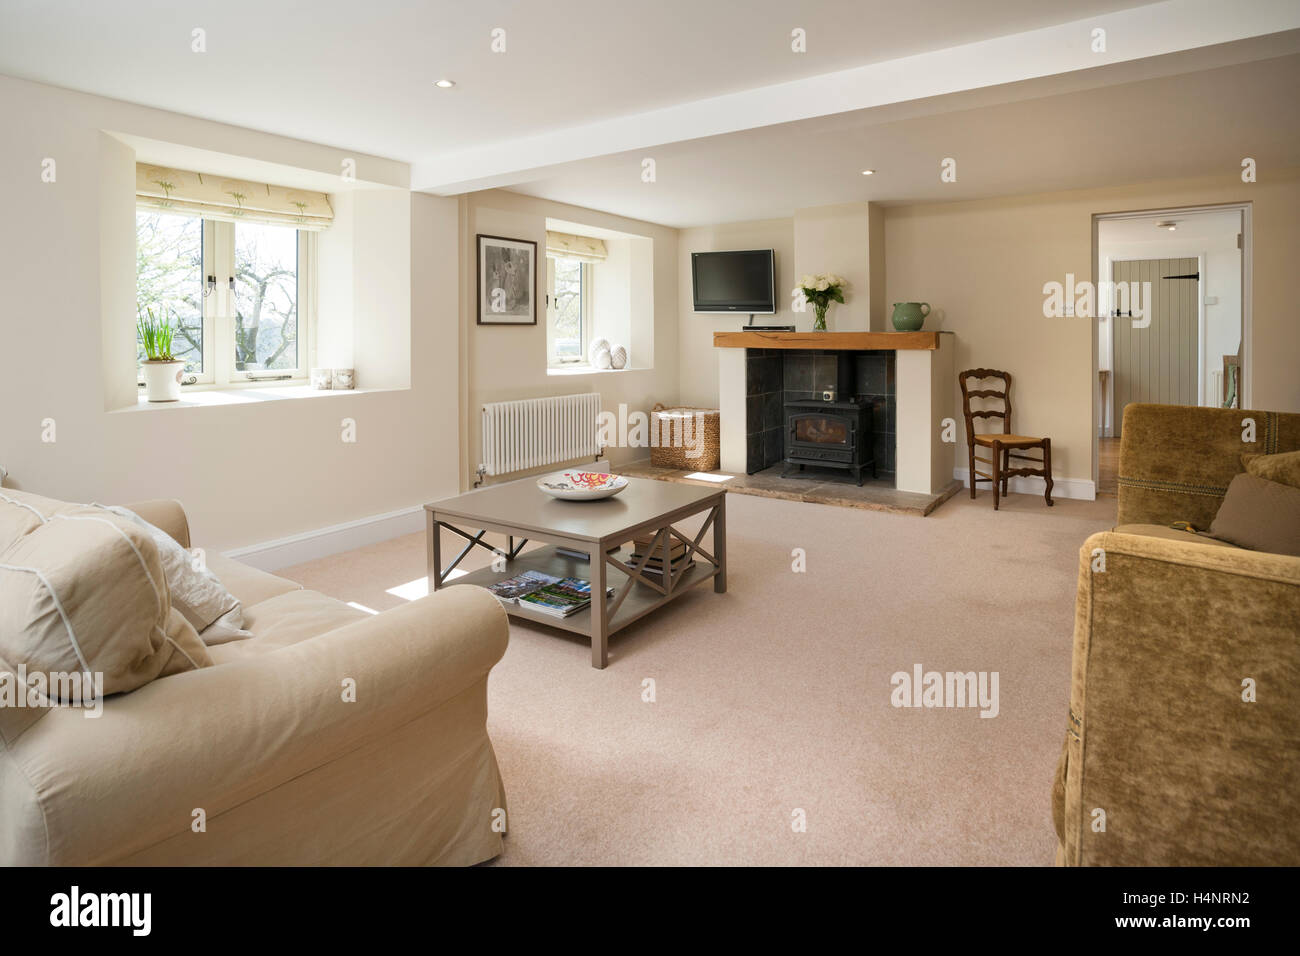 A minimally furnished period house sitting room Stock Photo